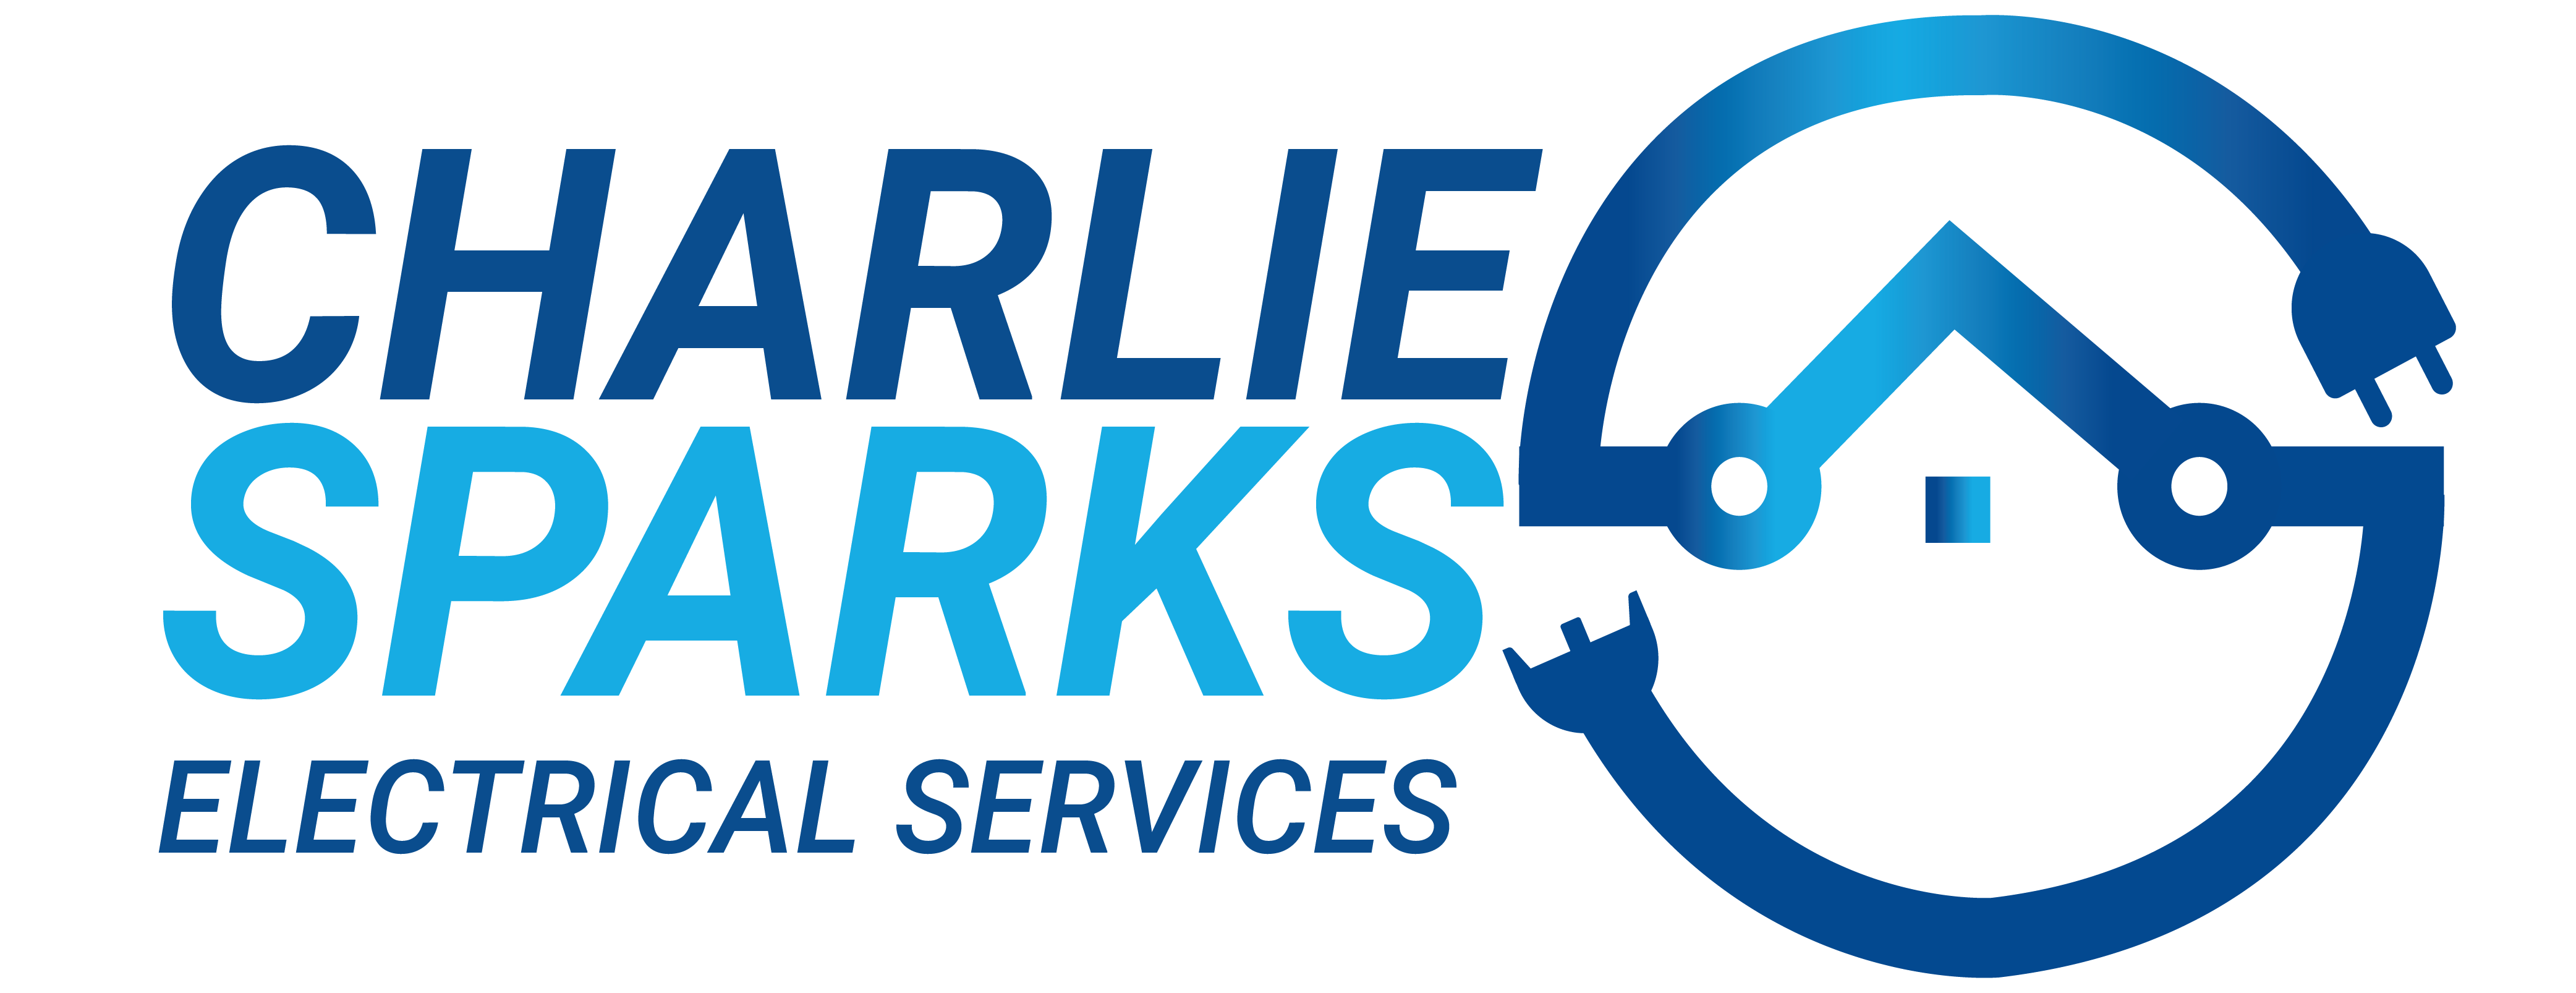 Charlie Sparks Electrical Services